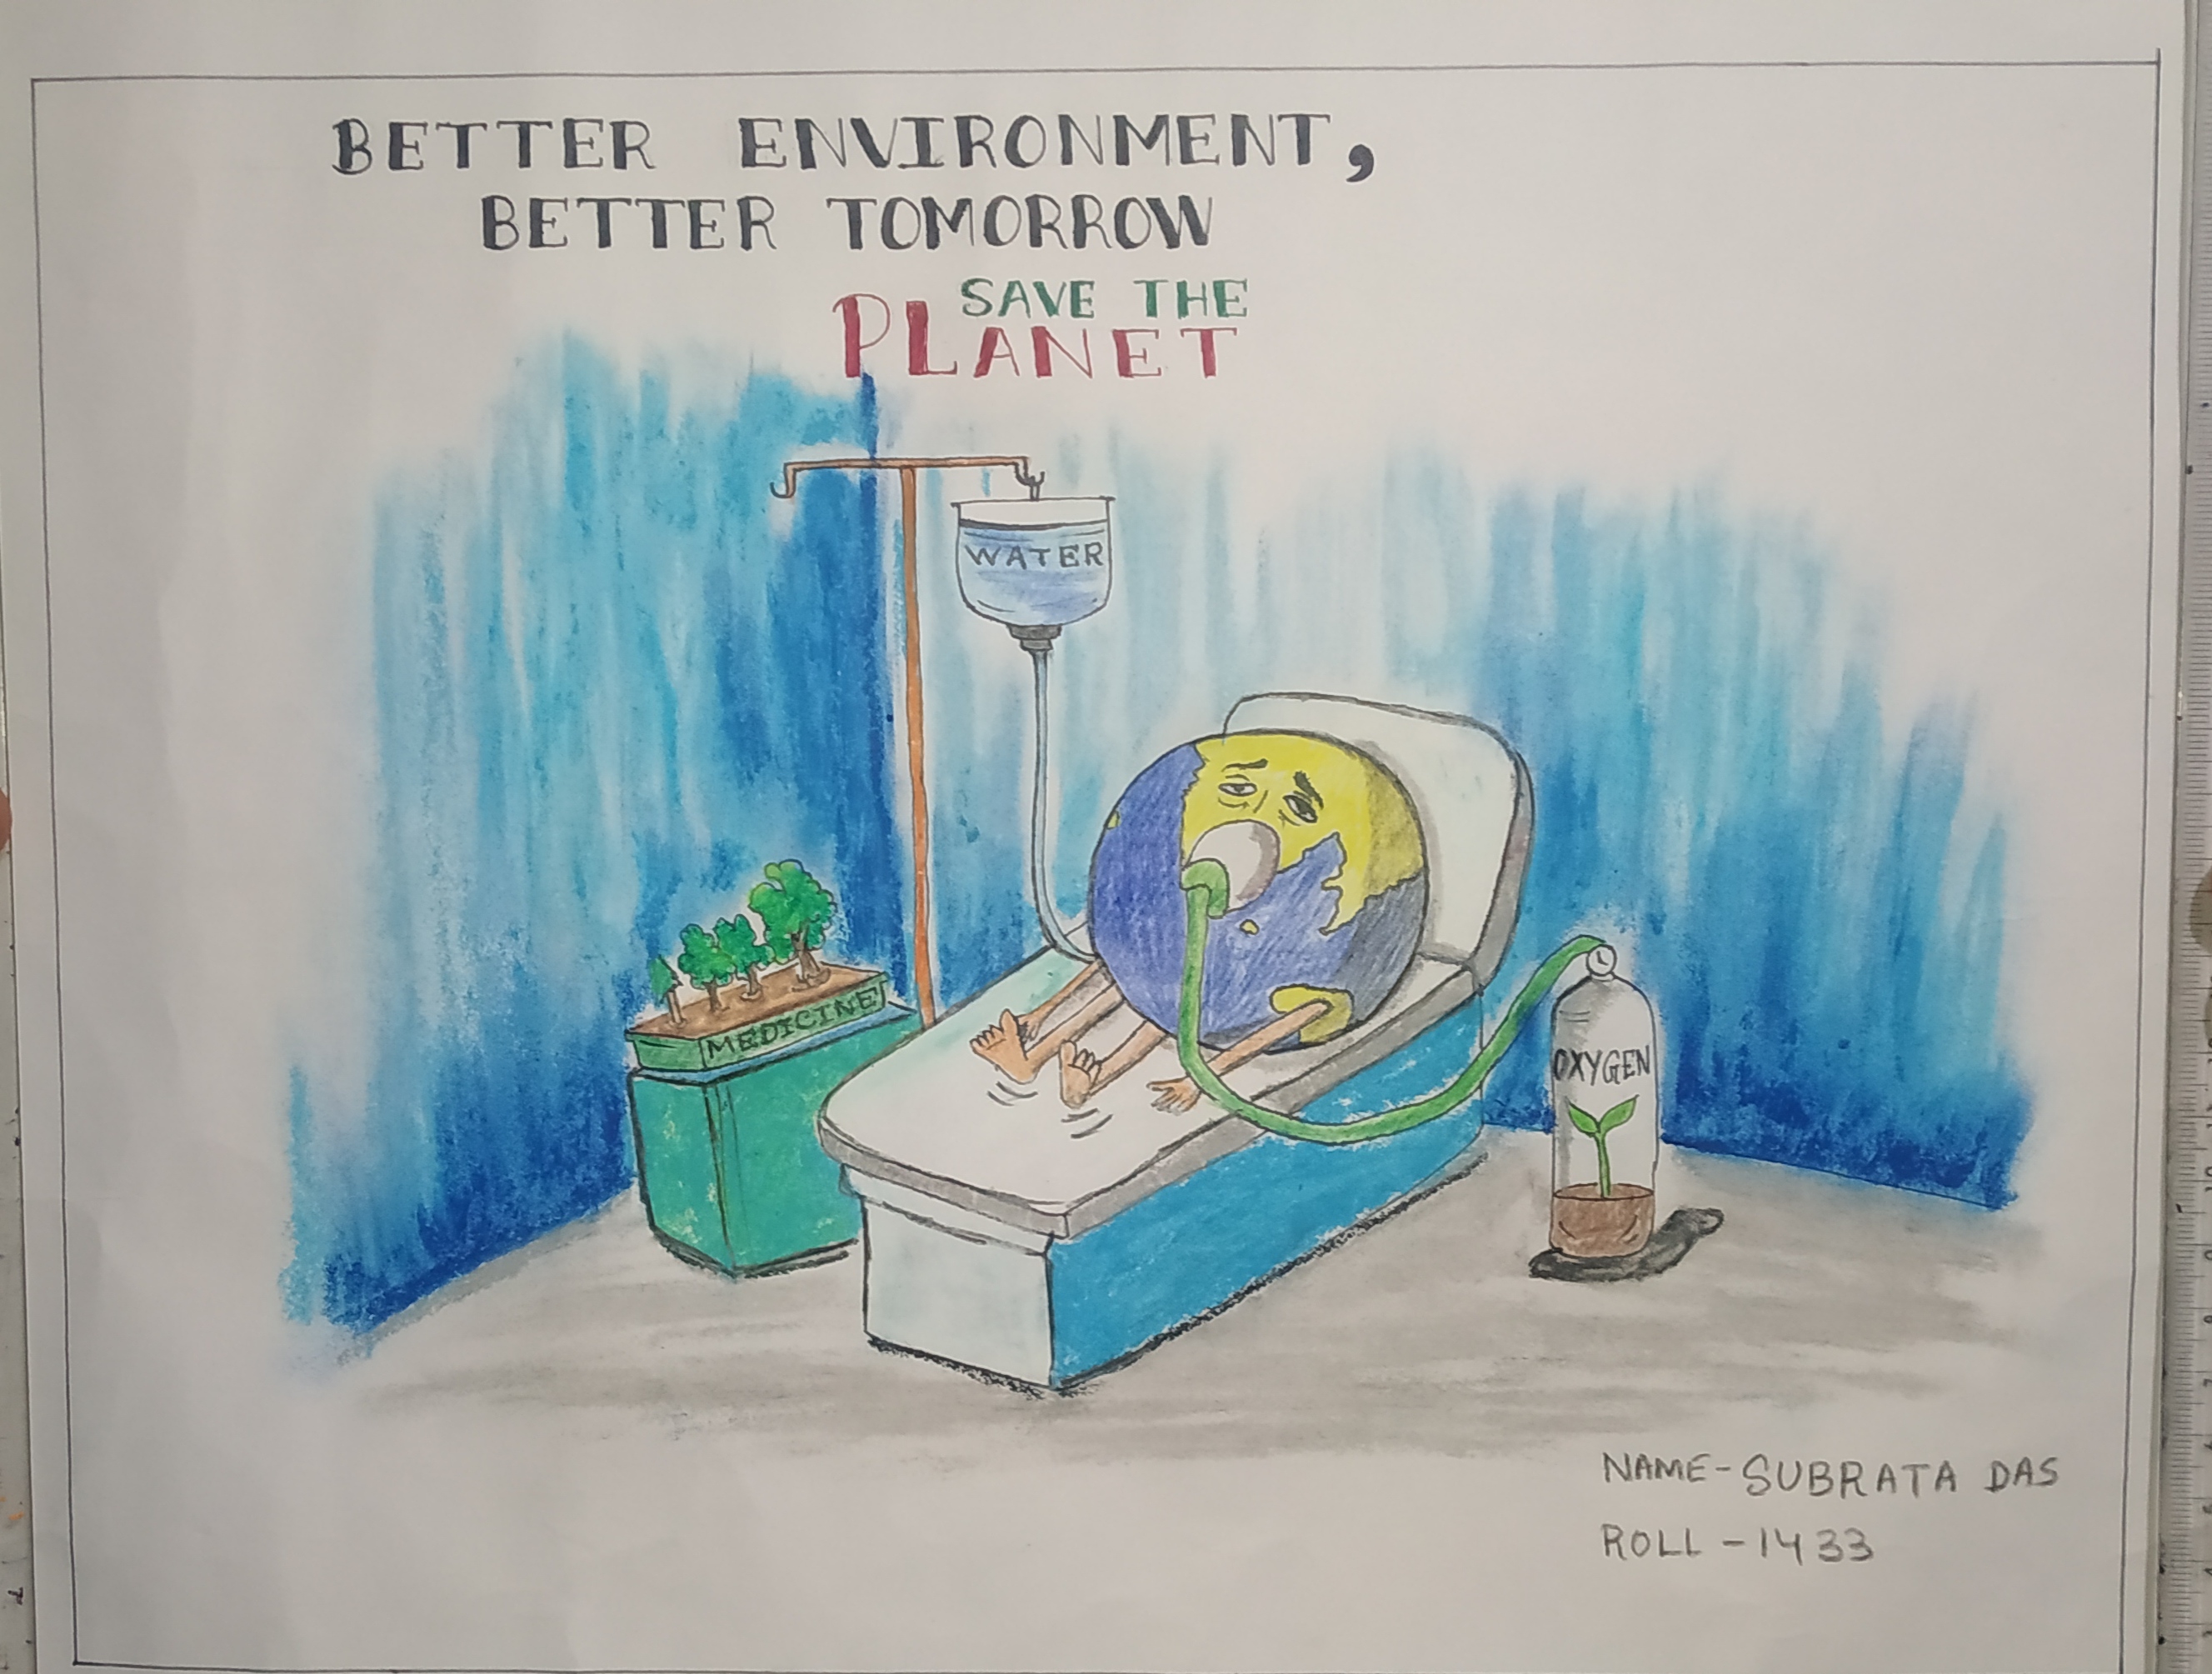 save environment posters competition